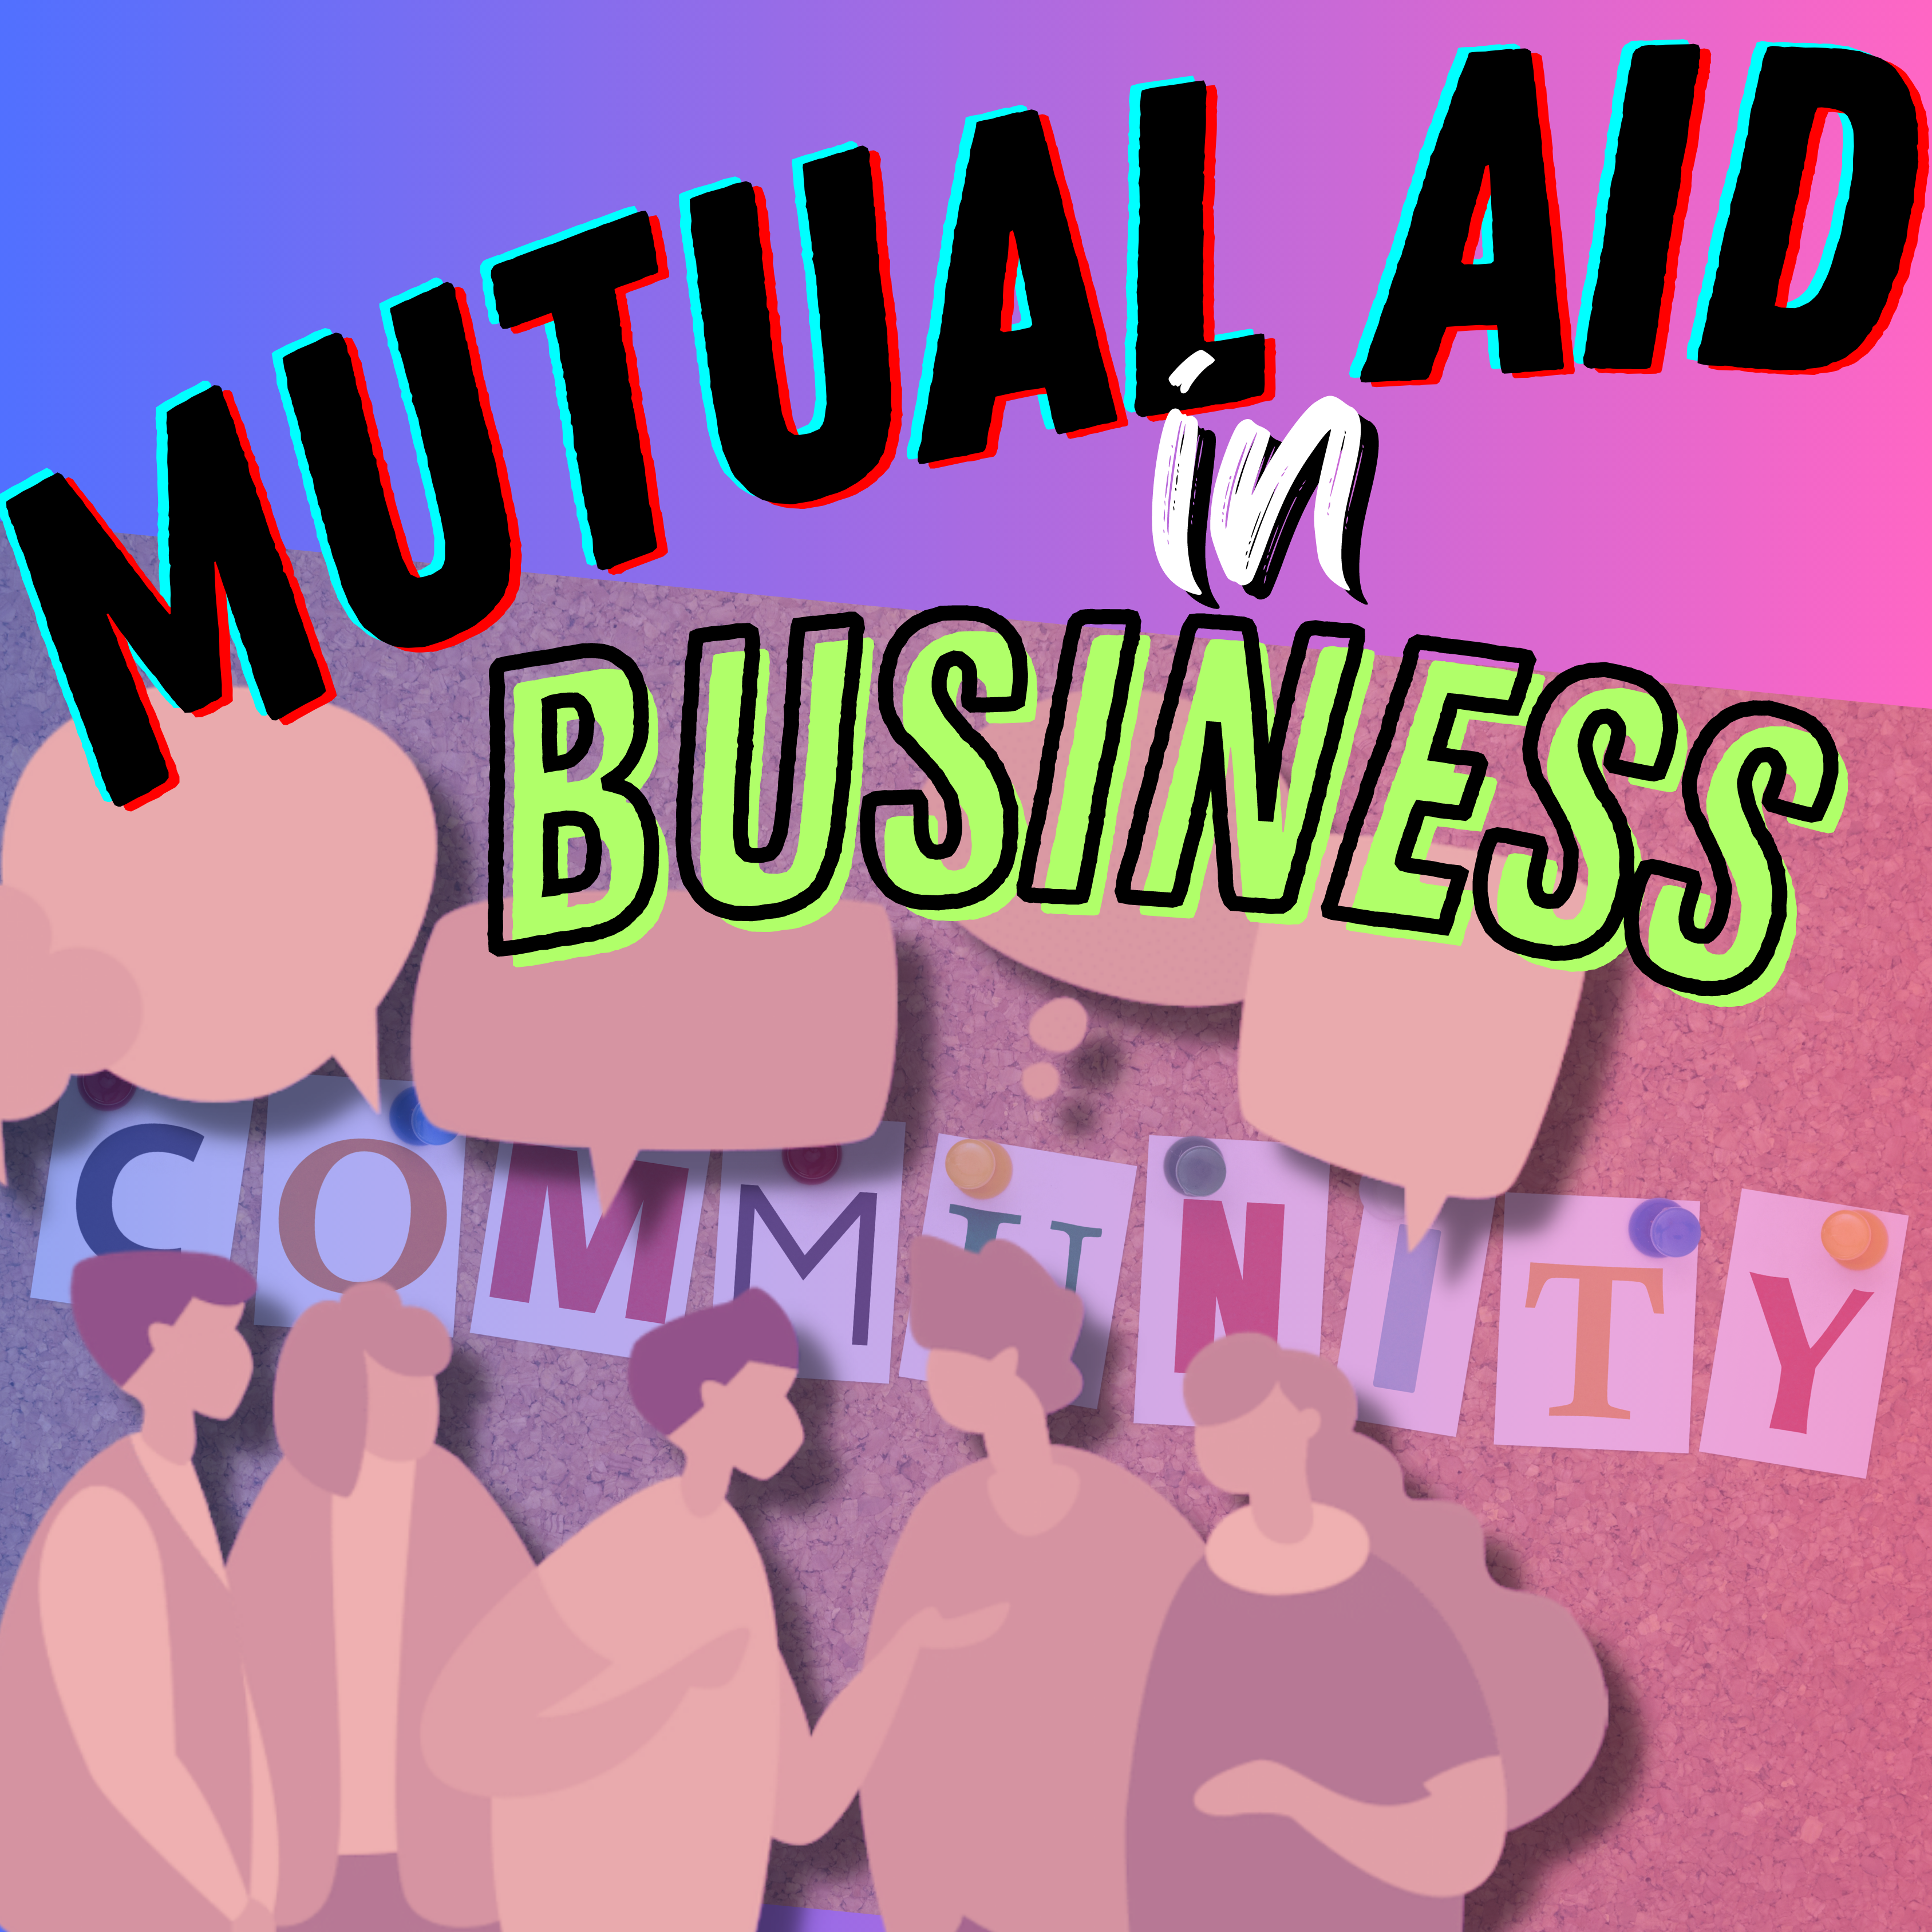 Mutual Aid in Business Blue and pink backgound, shades of tan people with empty text bubbles above them in the foreground.